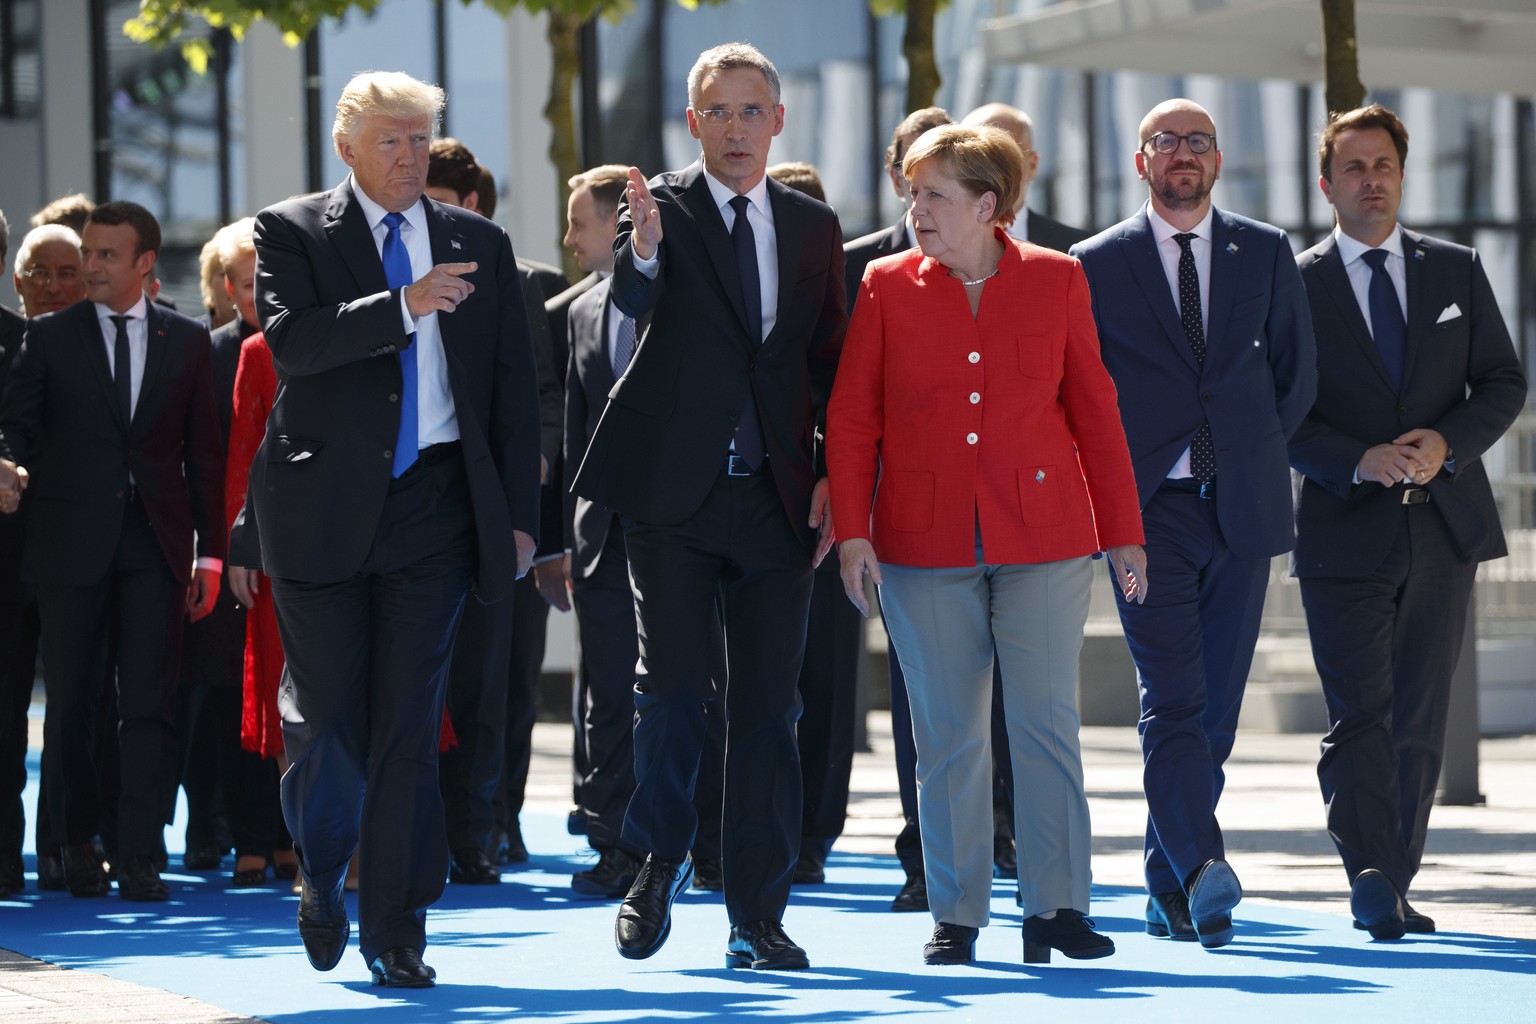 NATO Secretary General Jens Stoltenberg, center, walks with President Donald Trump and German Chancellor Angela Merkel during a ceremony to unveil artifacts from the World Trade Center and Berlin Wall ...